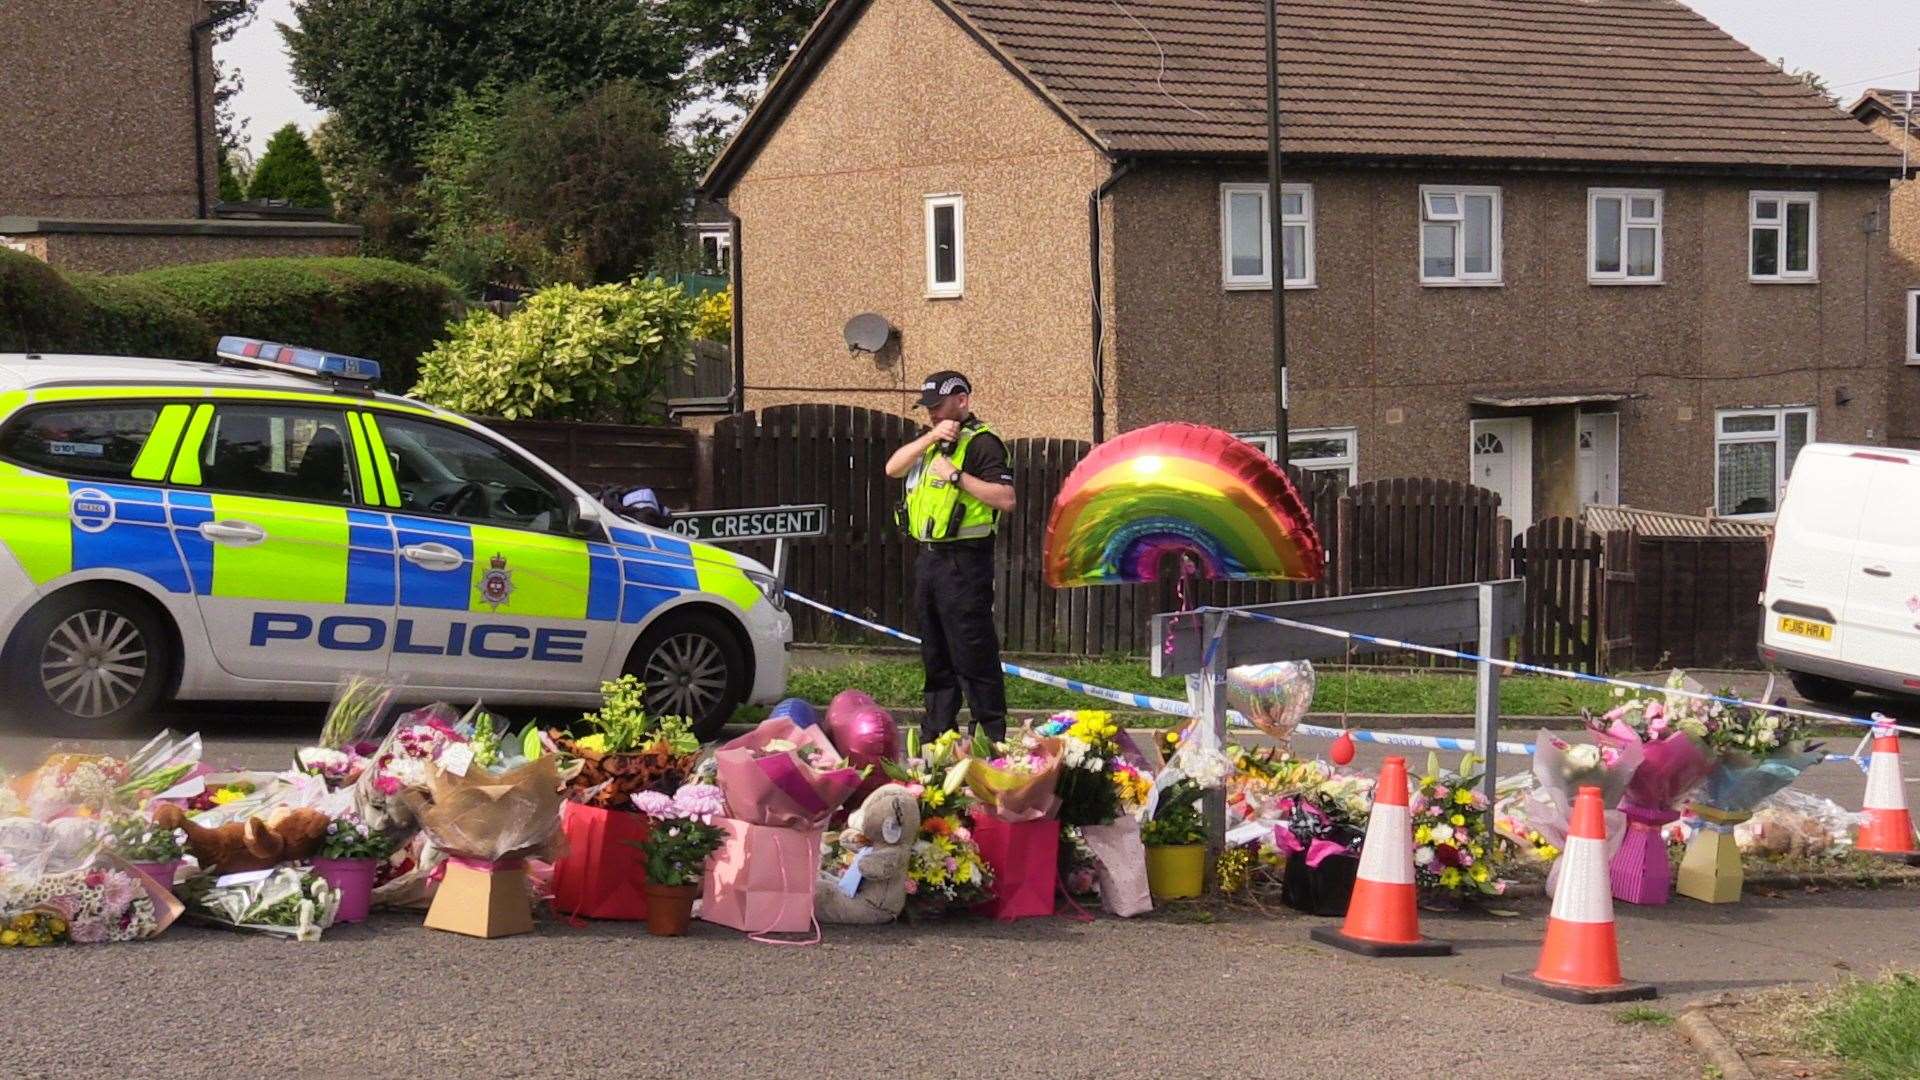 Flowers and tributes were left at the scene in Killamarsh, Derbyshire (David Higgens/PA)